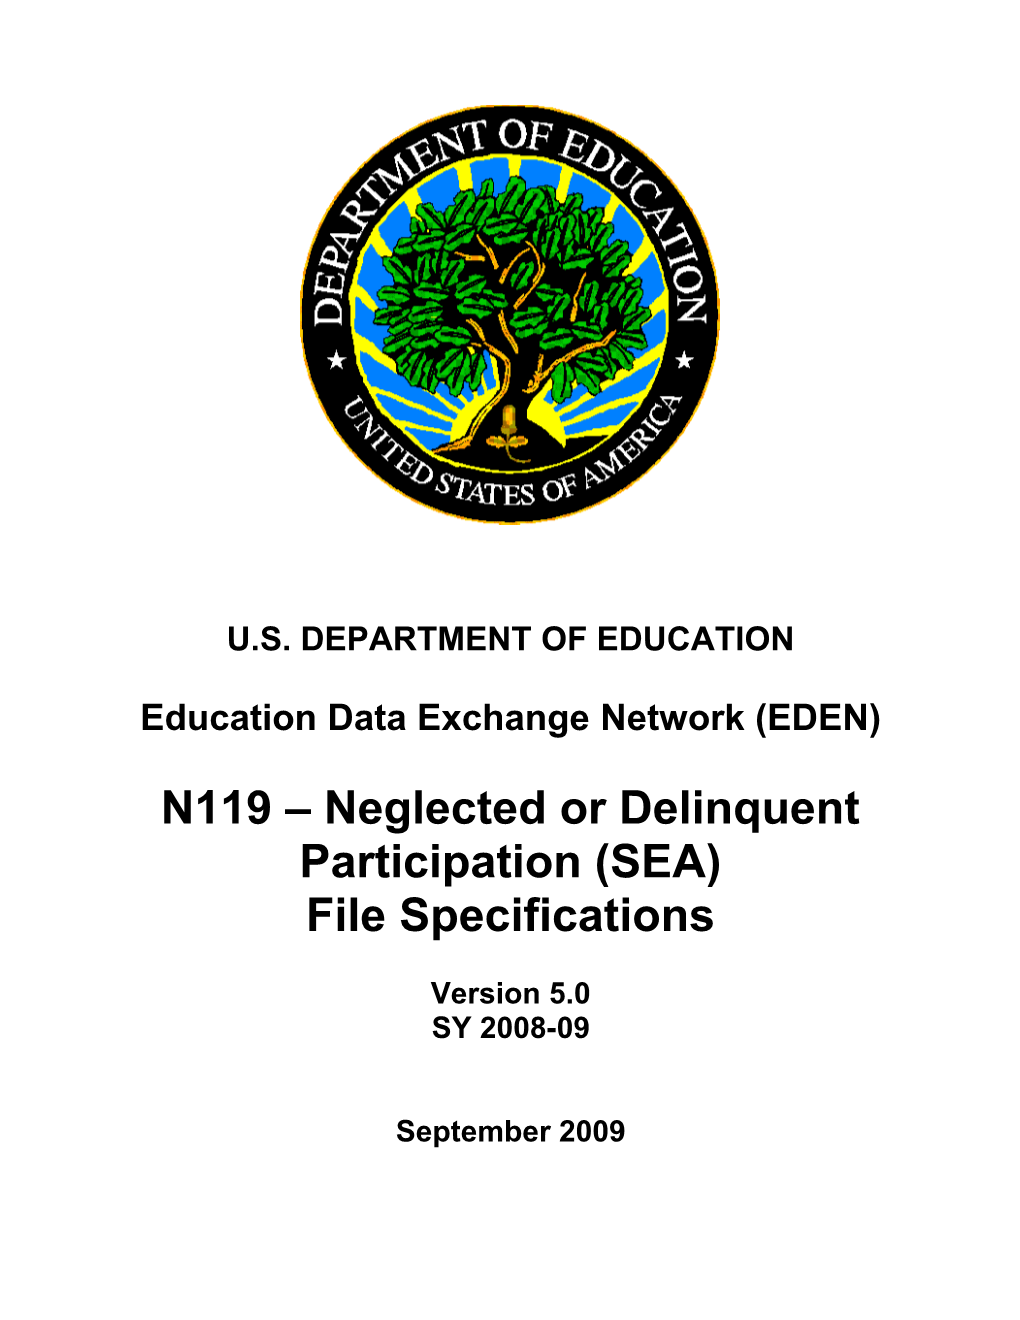 N119 Neglected Or Delinquent Participation (SEA) File Specifications (MS Word)